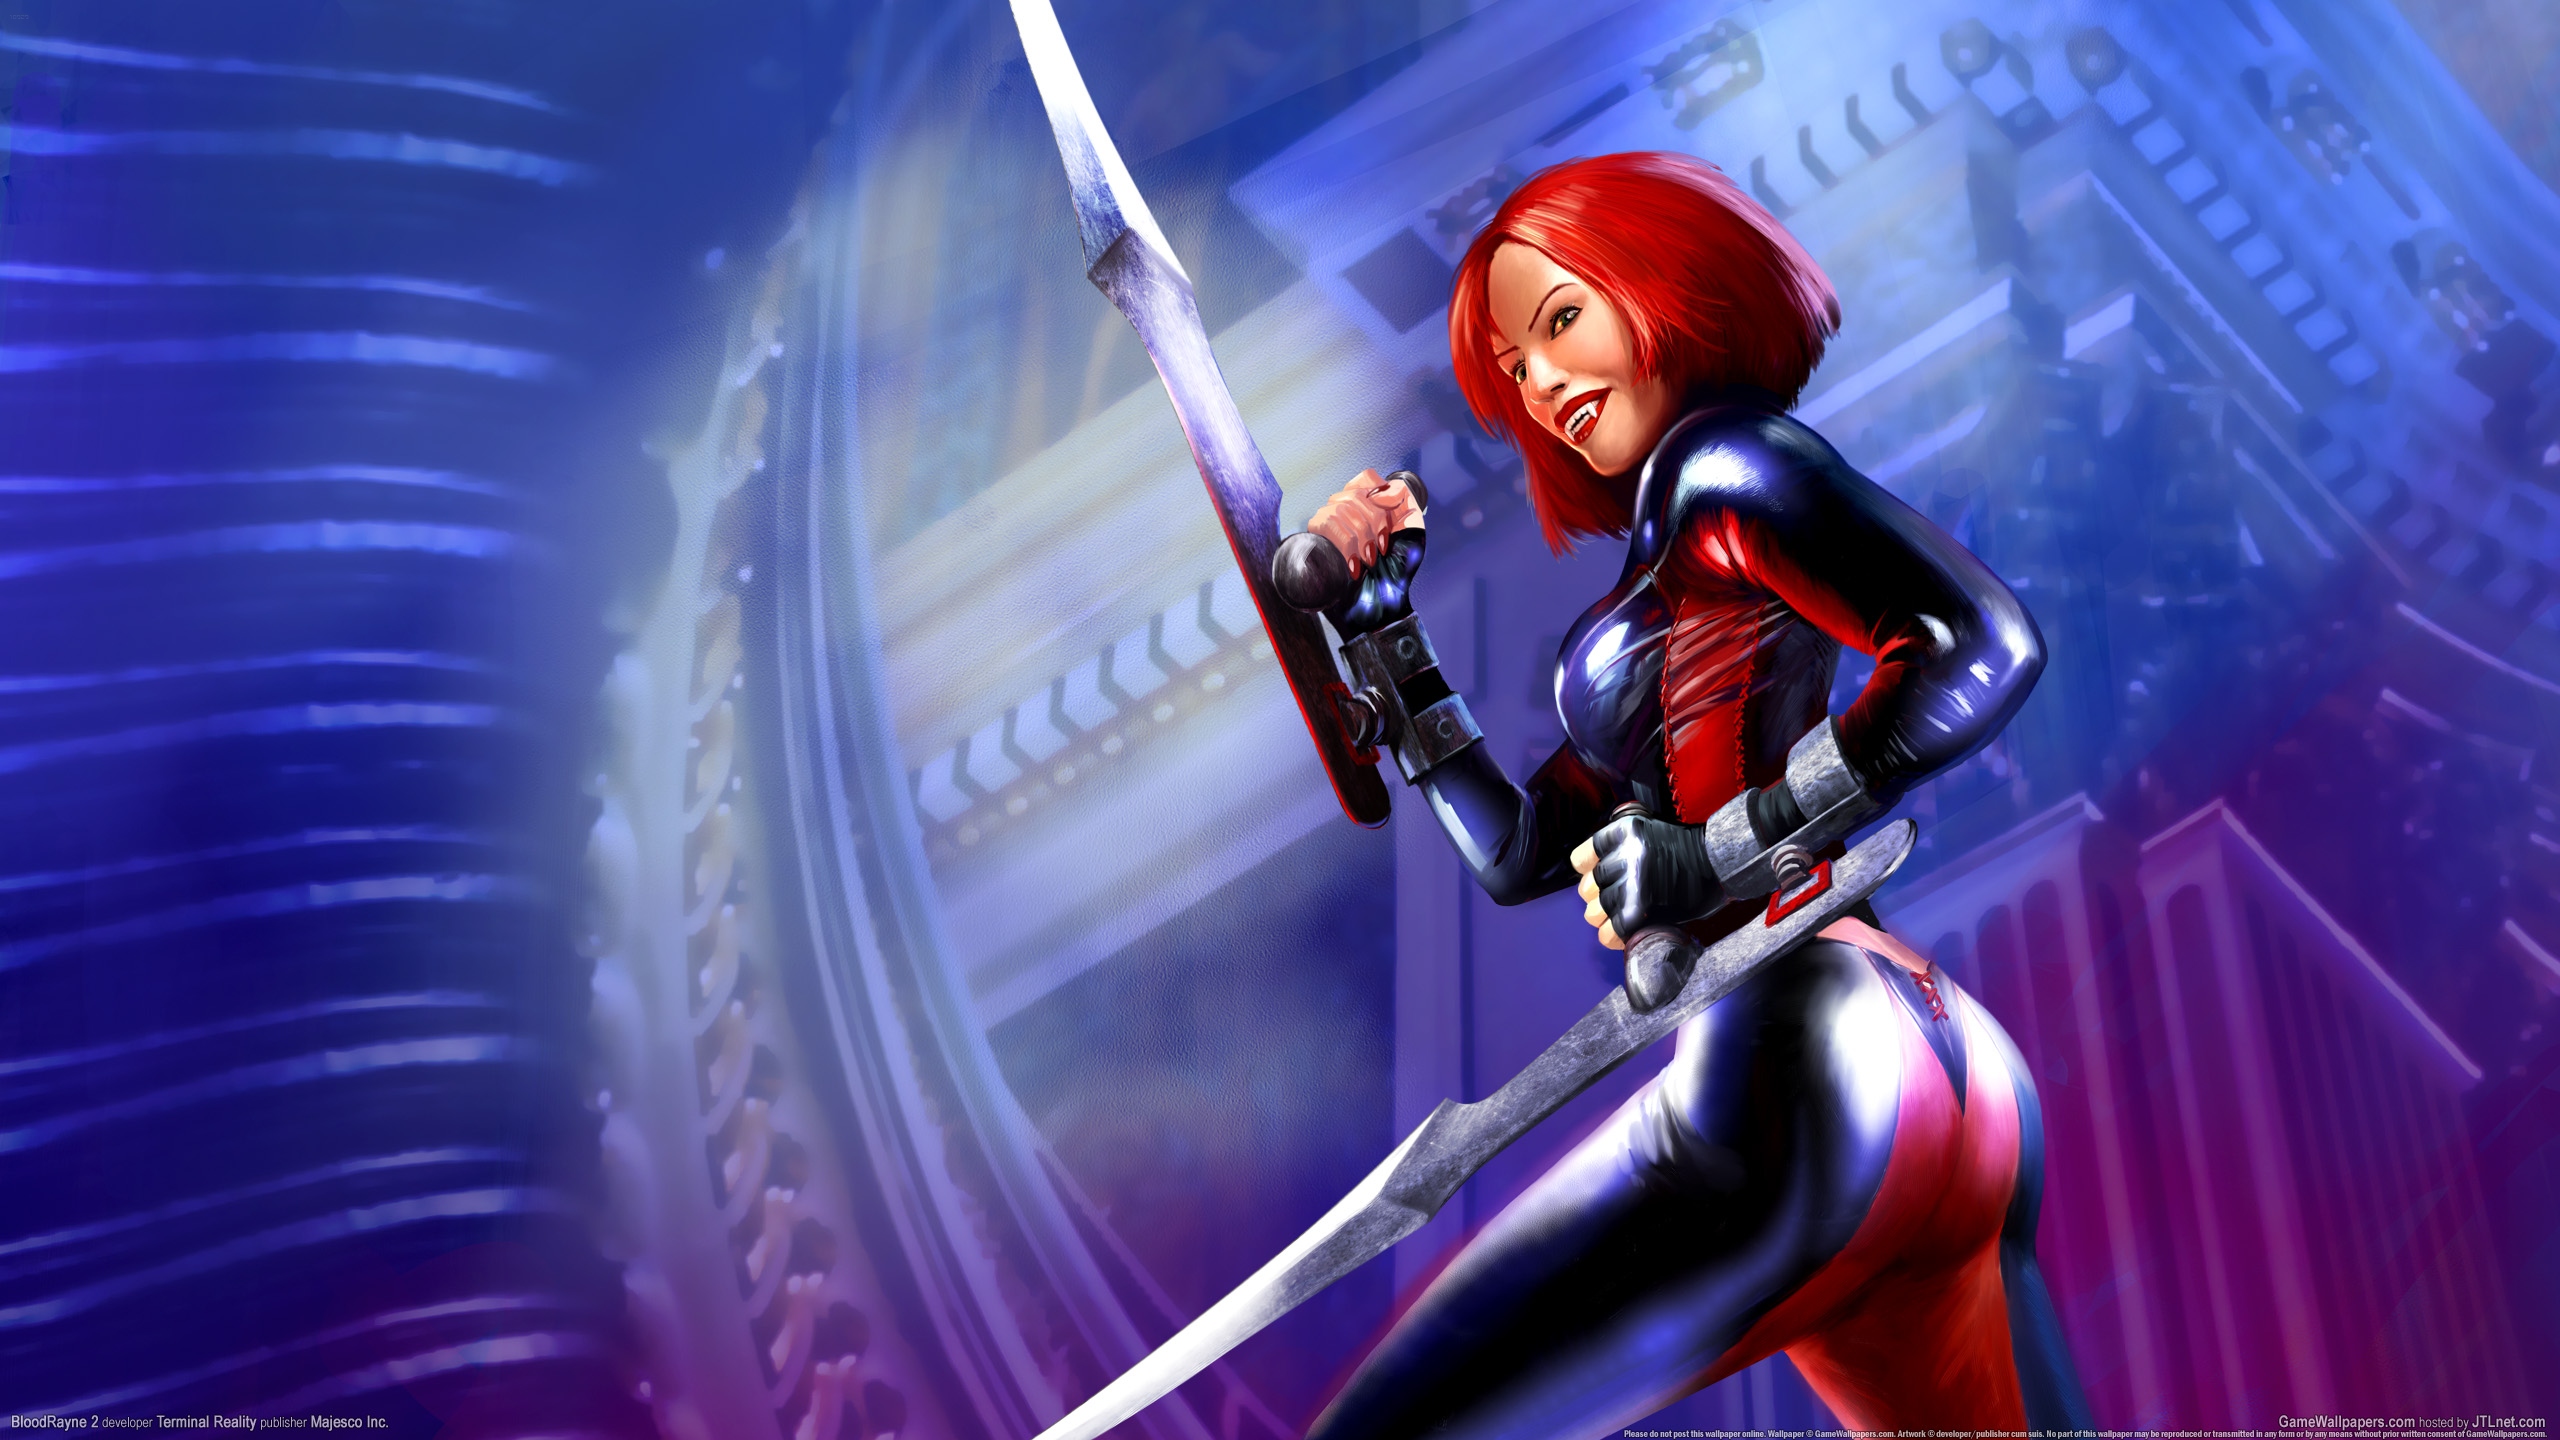 BloodRayne 2 2560x1440 wallpaper or background 08